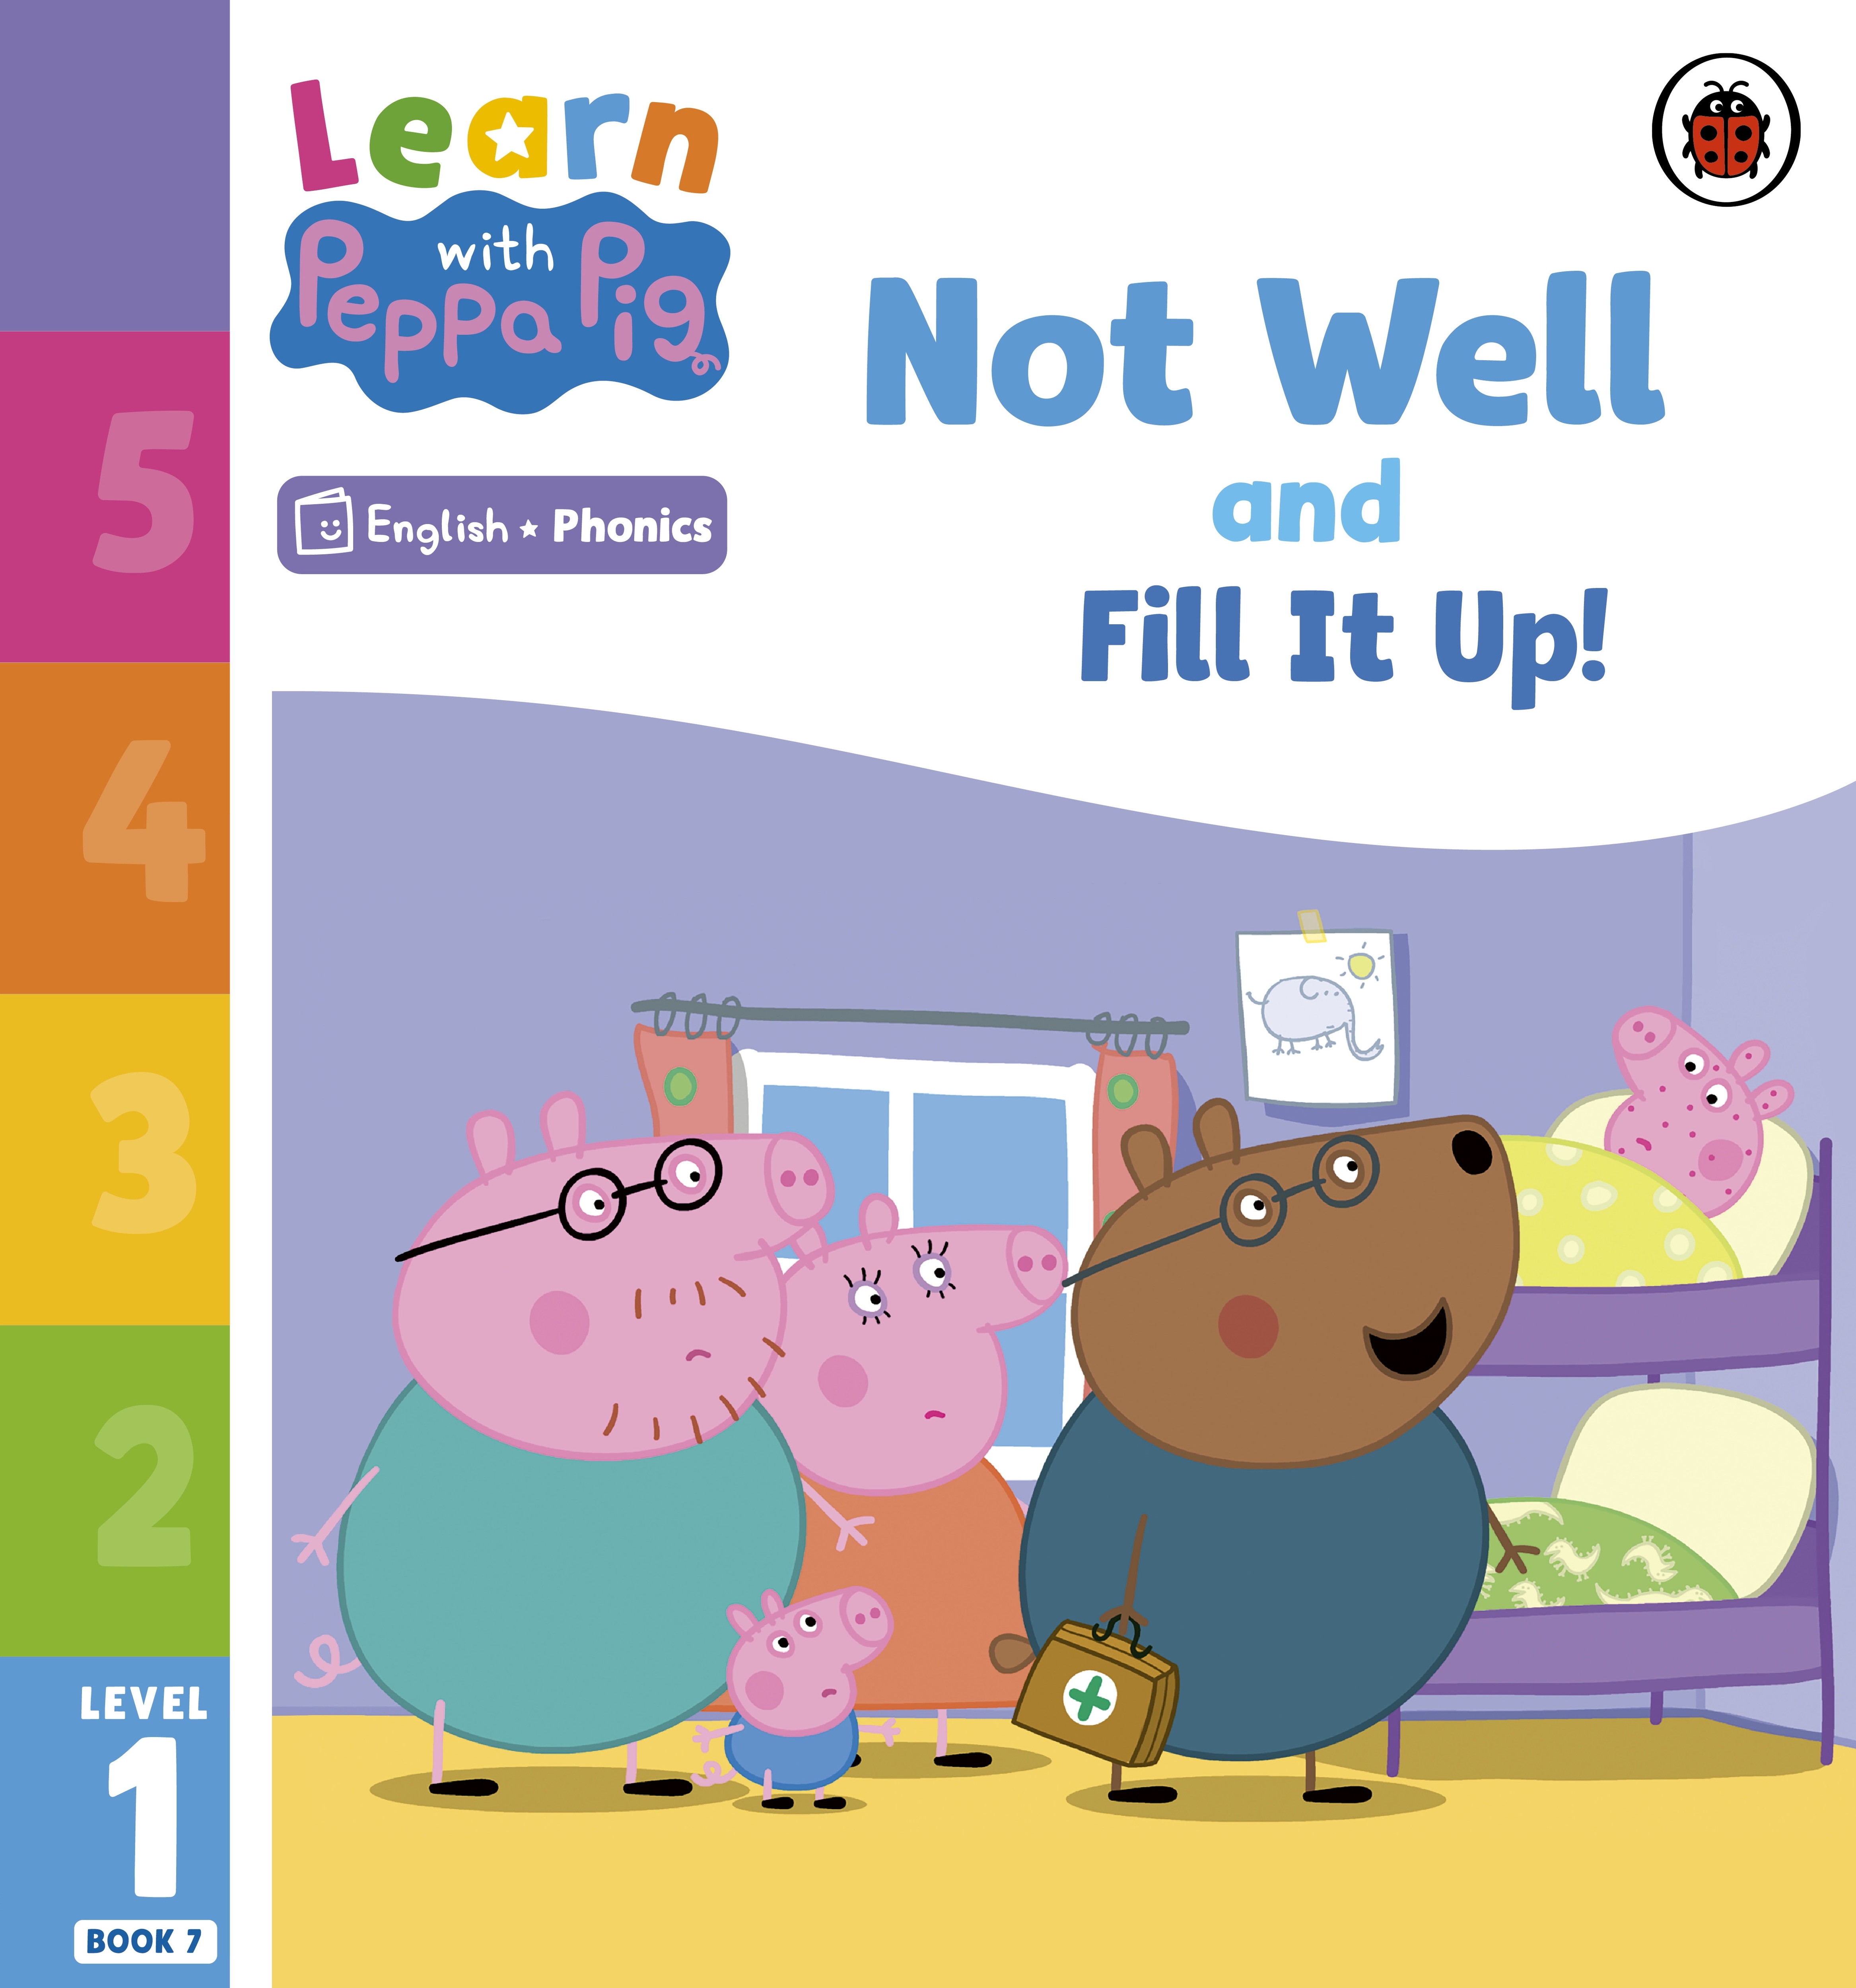 Book “Learn with Peppa Phonics Level 1 Book 7 — Not Well and Fill it Up! (Phonics Reader)” by Peppa Pig — January 5, 2023